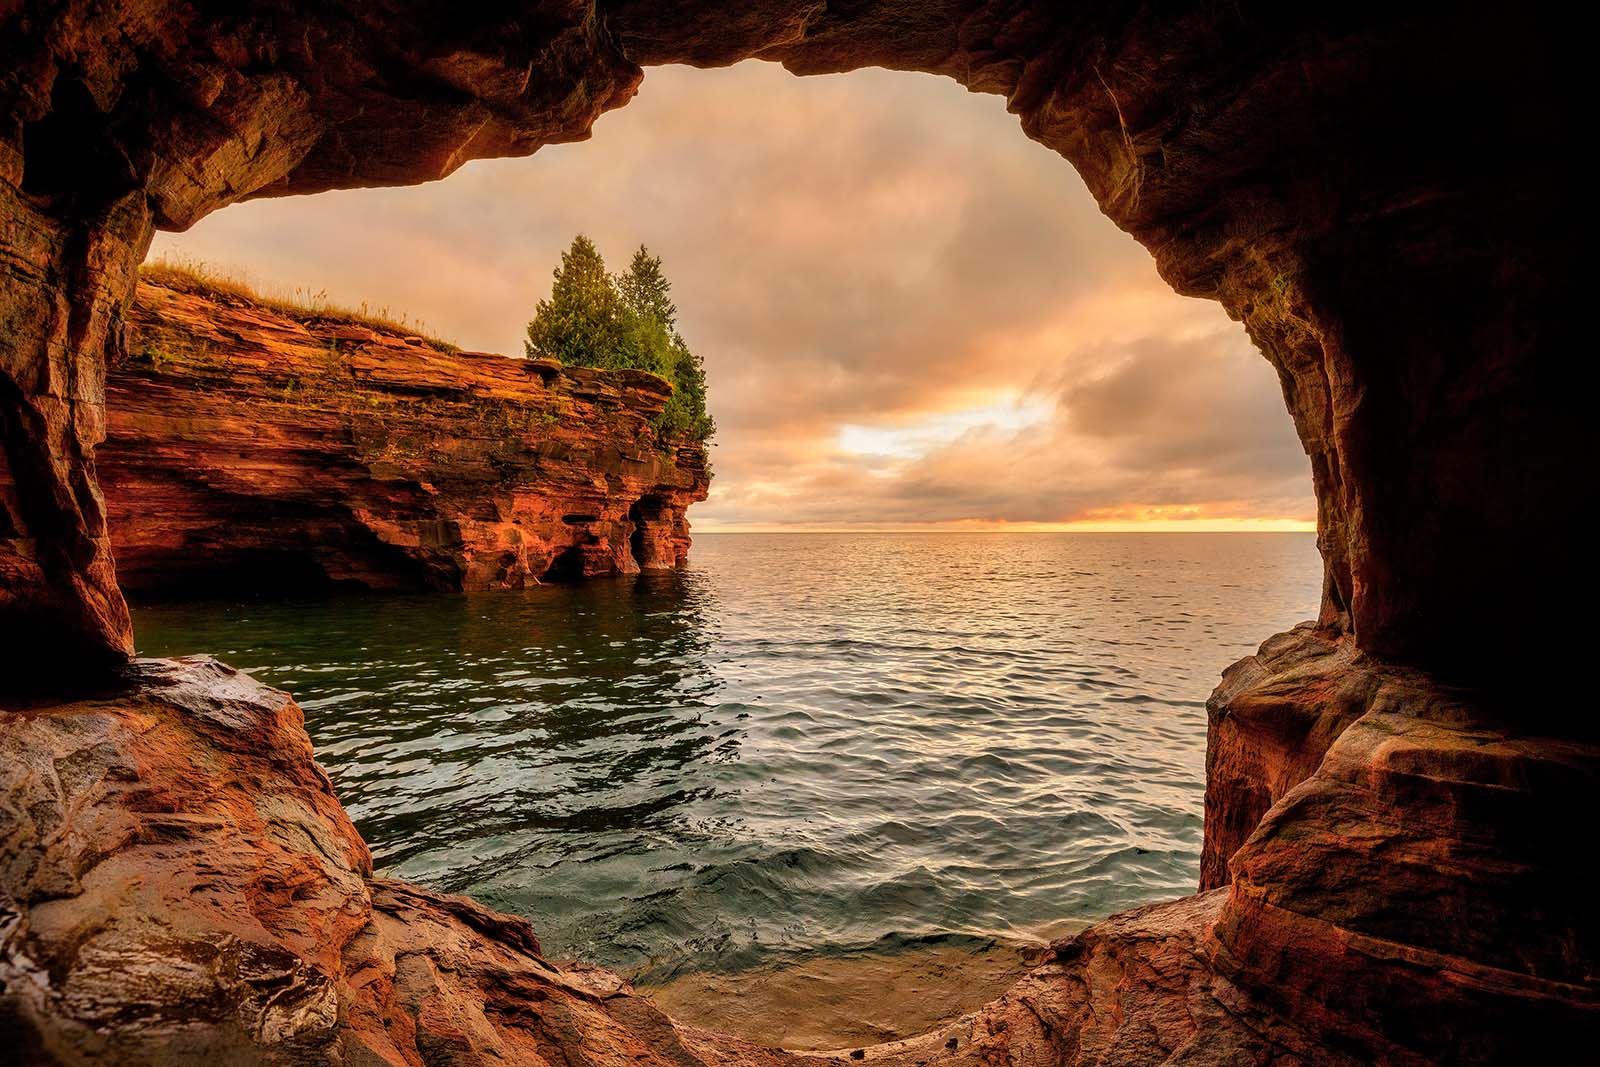 sunrise from a sea cave on devil's island in the apostle islands national lakeshore on lake superior wisconsin